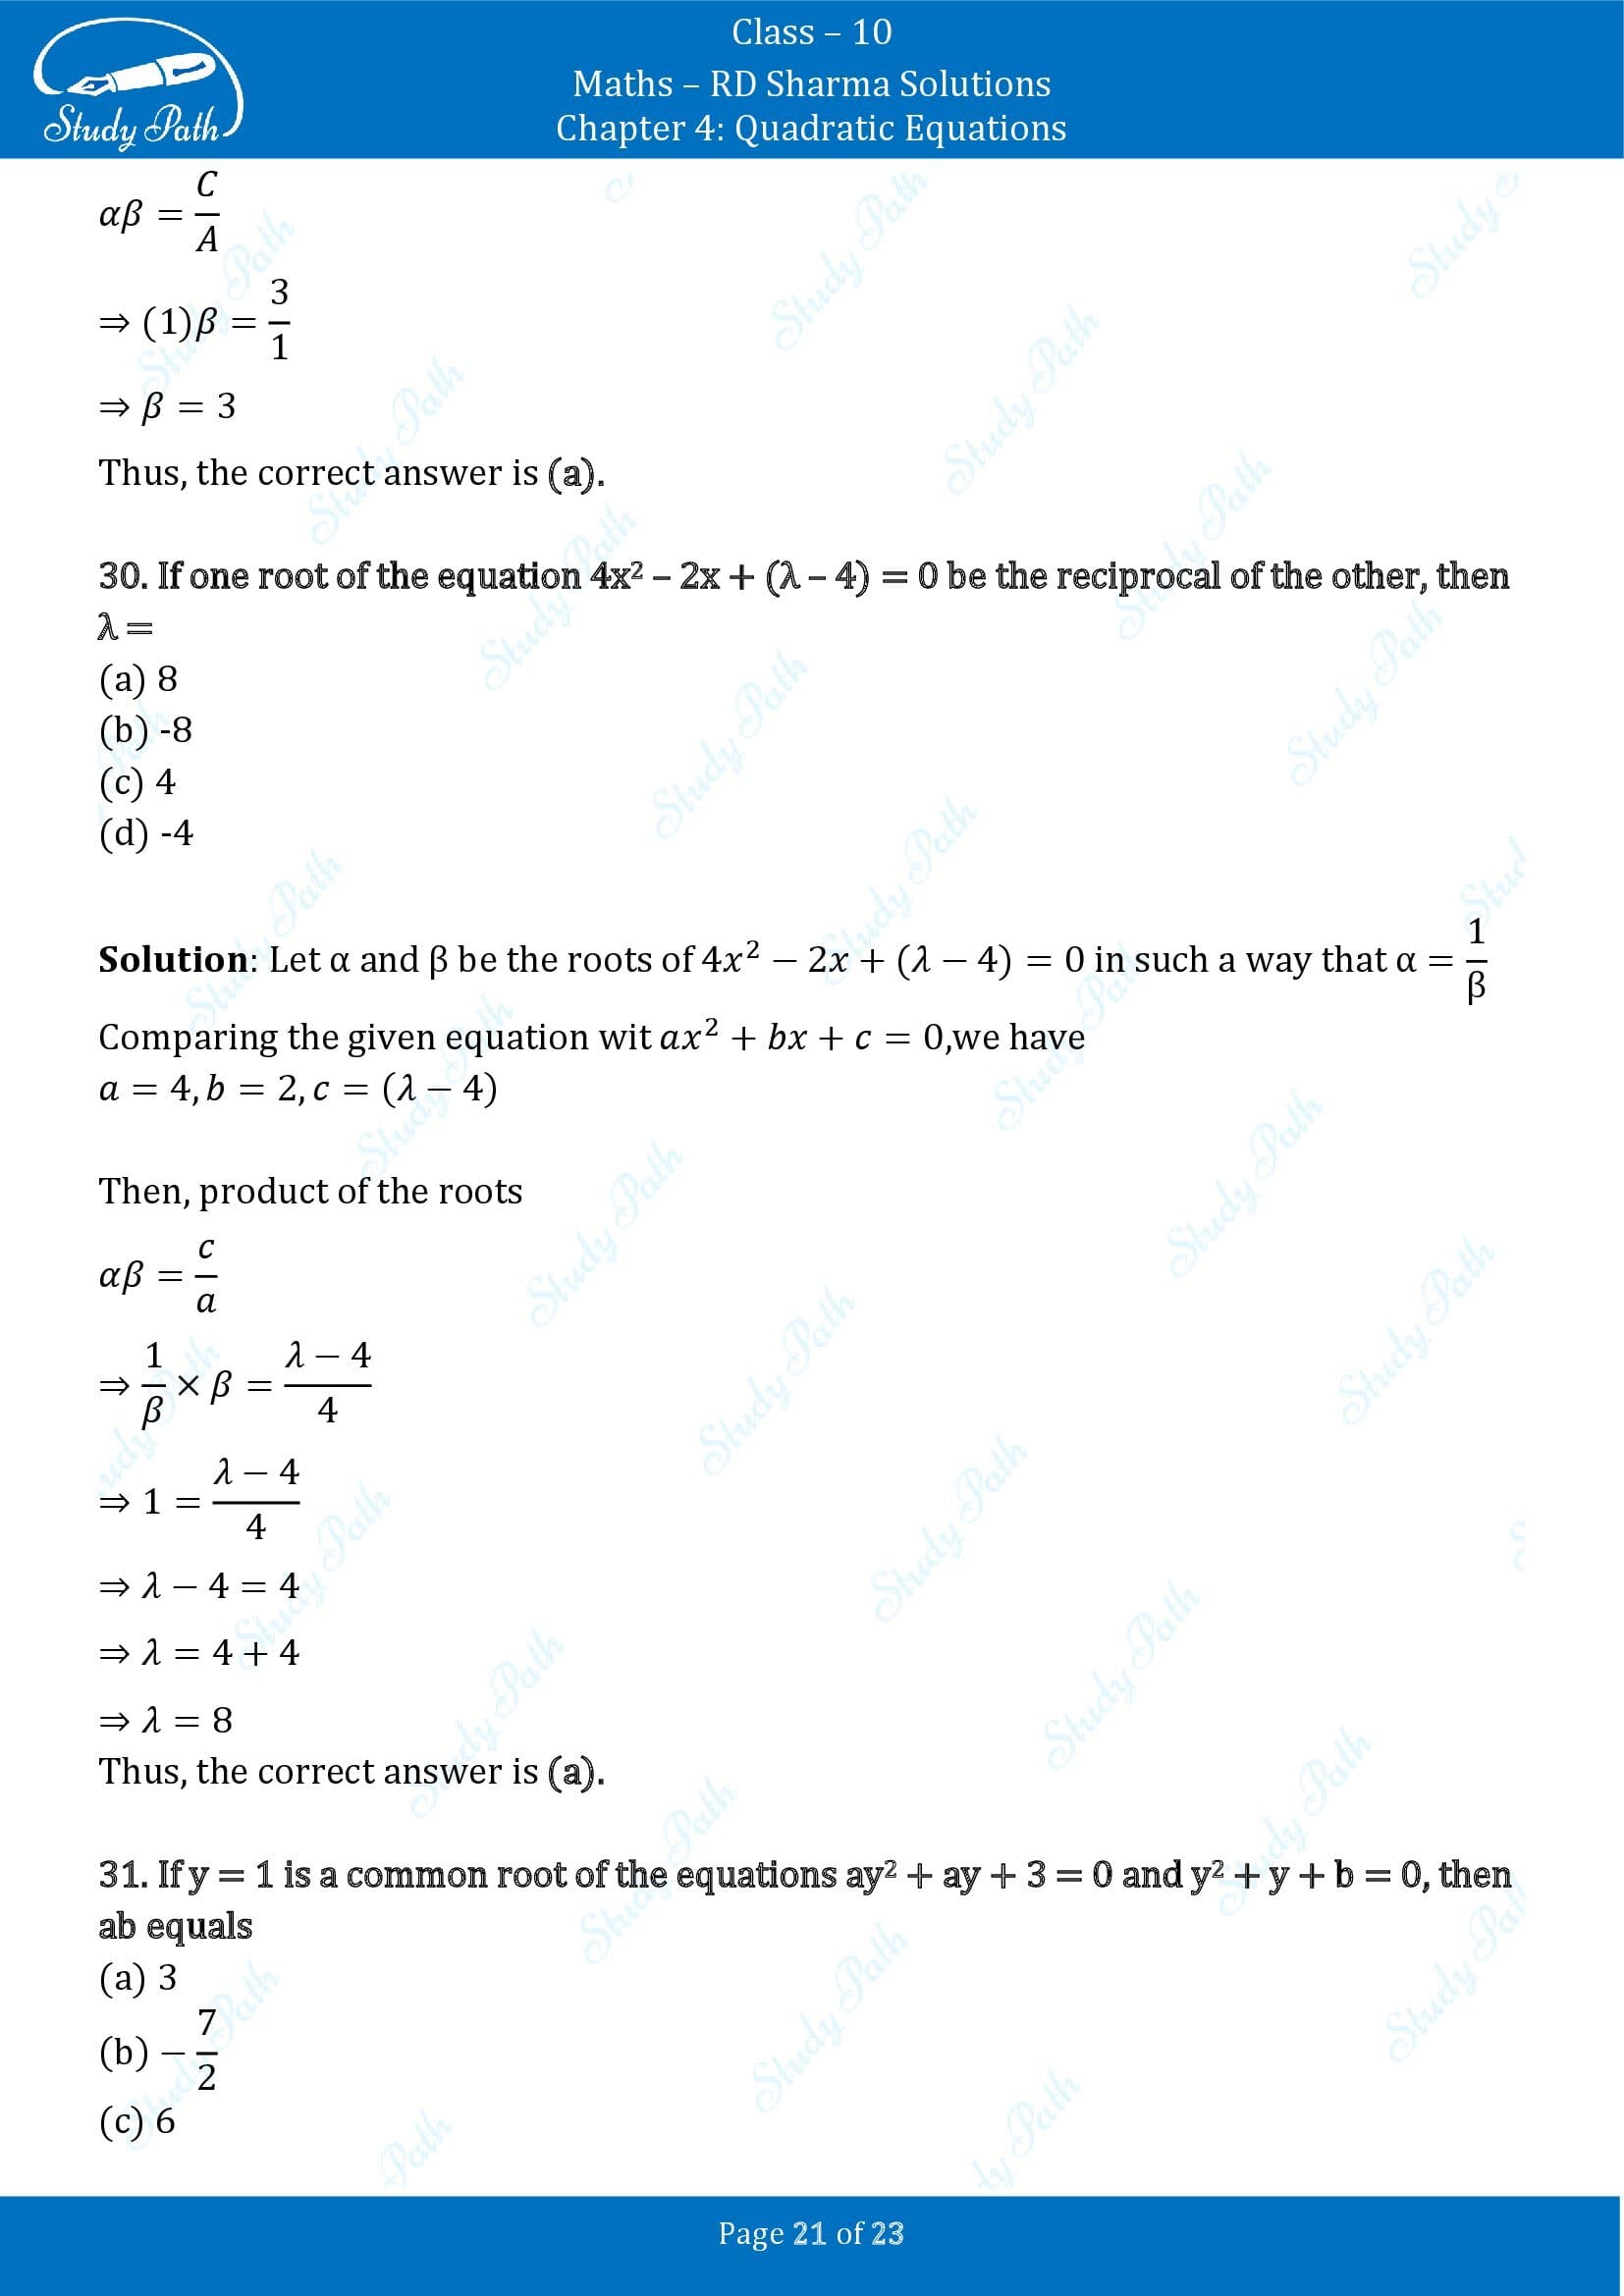 RD Sharma Solutions Class 10 Chapter 4 Quadratic Equations Multiple Choice Questions MCQs 00021